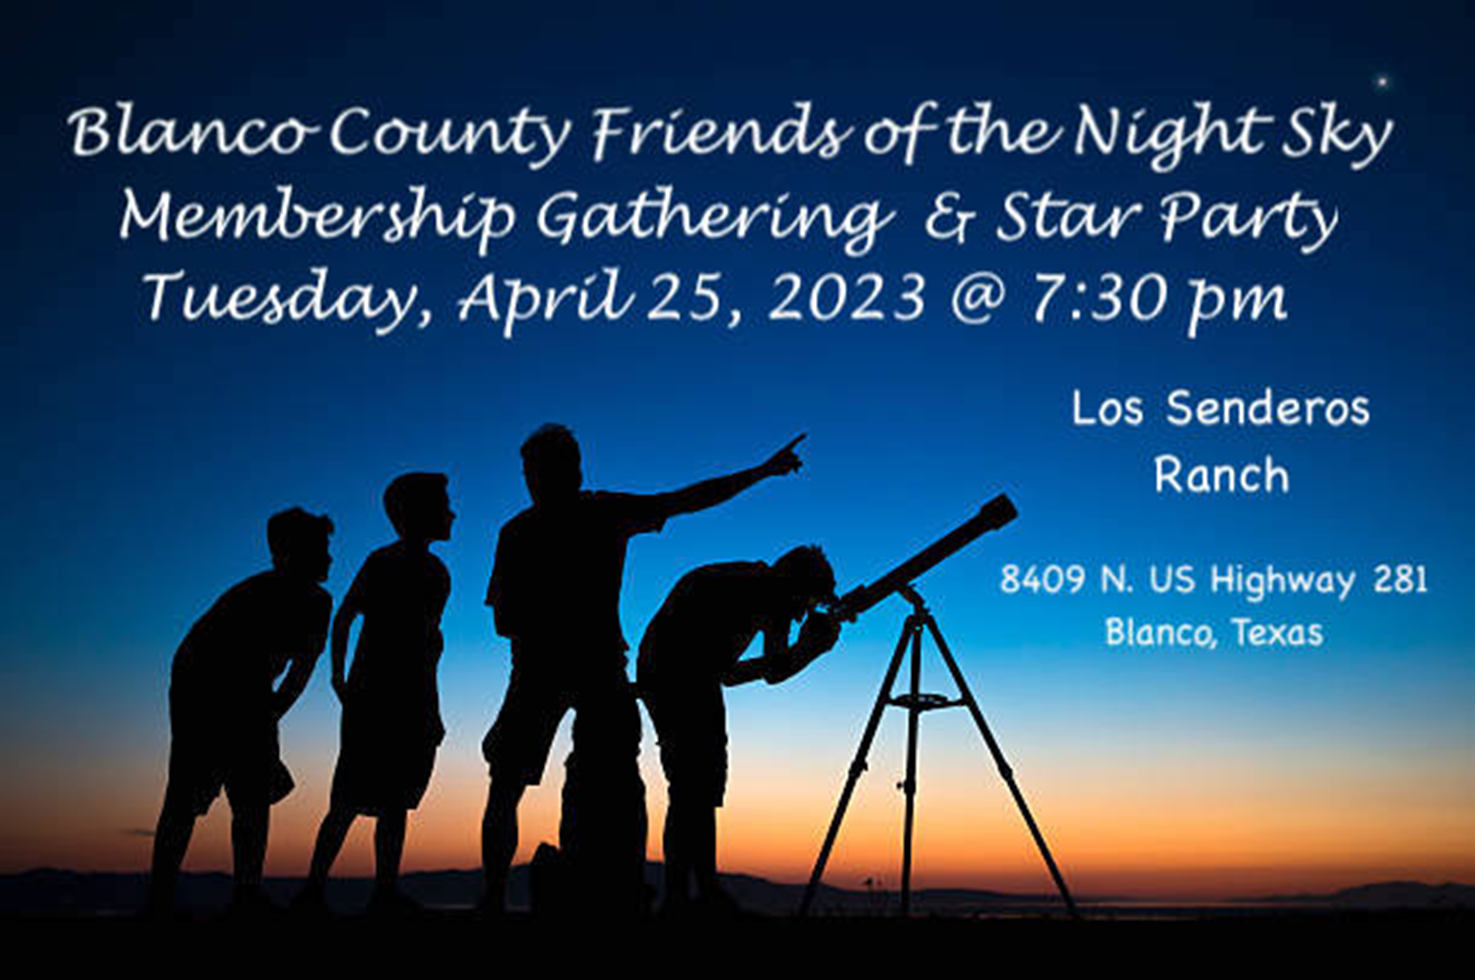 Annual Star Party